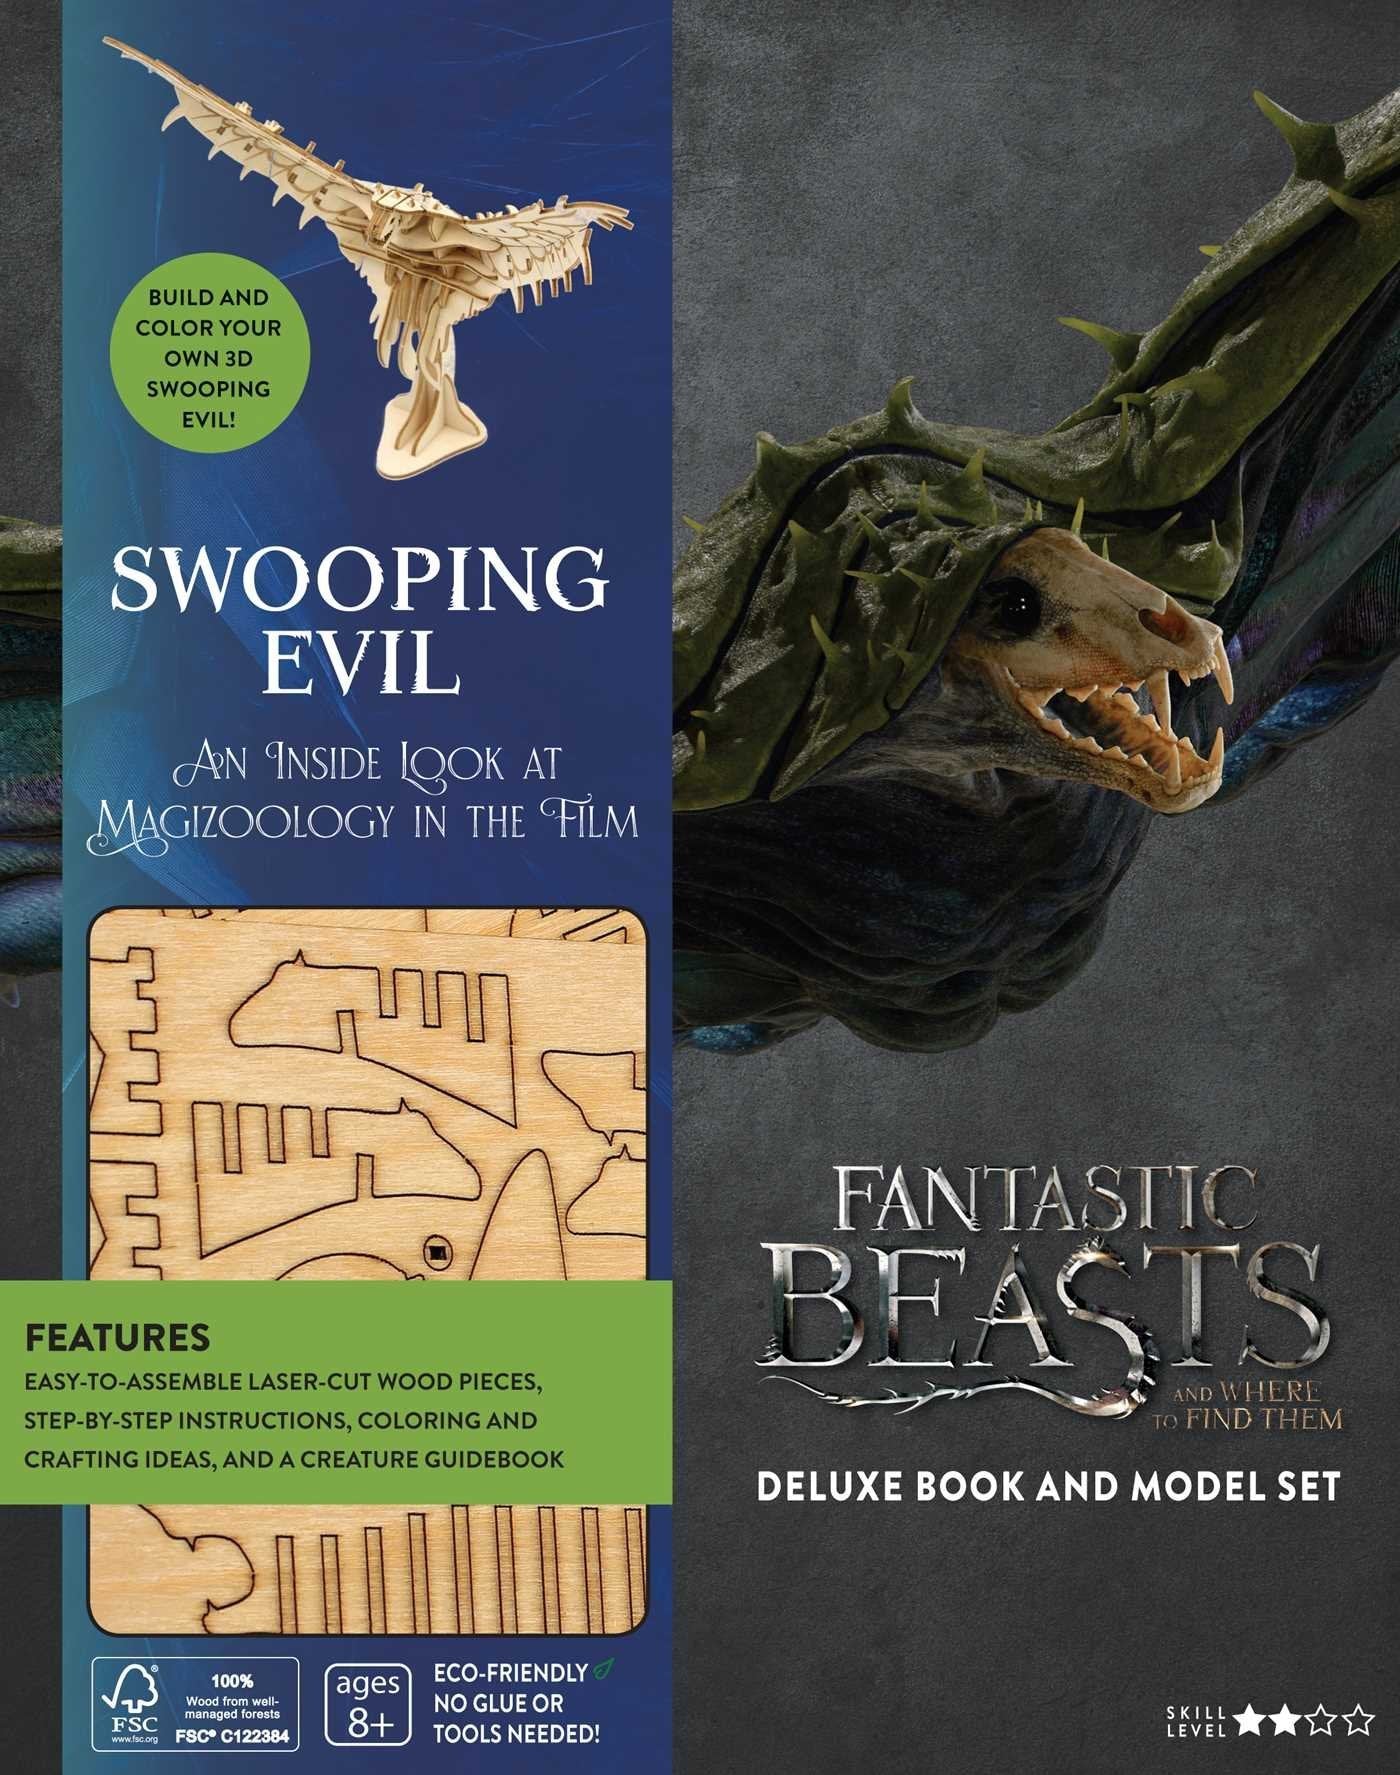 Fantastic Beasts and Where to Find Them - Swooping Evil Deluxe Book and Model Set - darkling.be